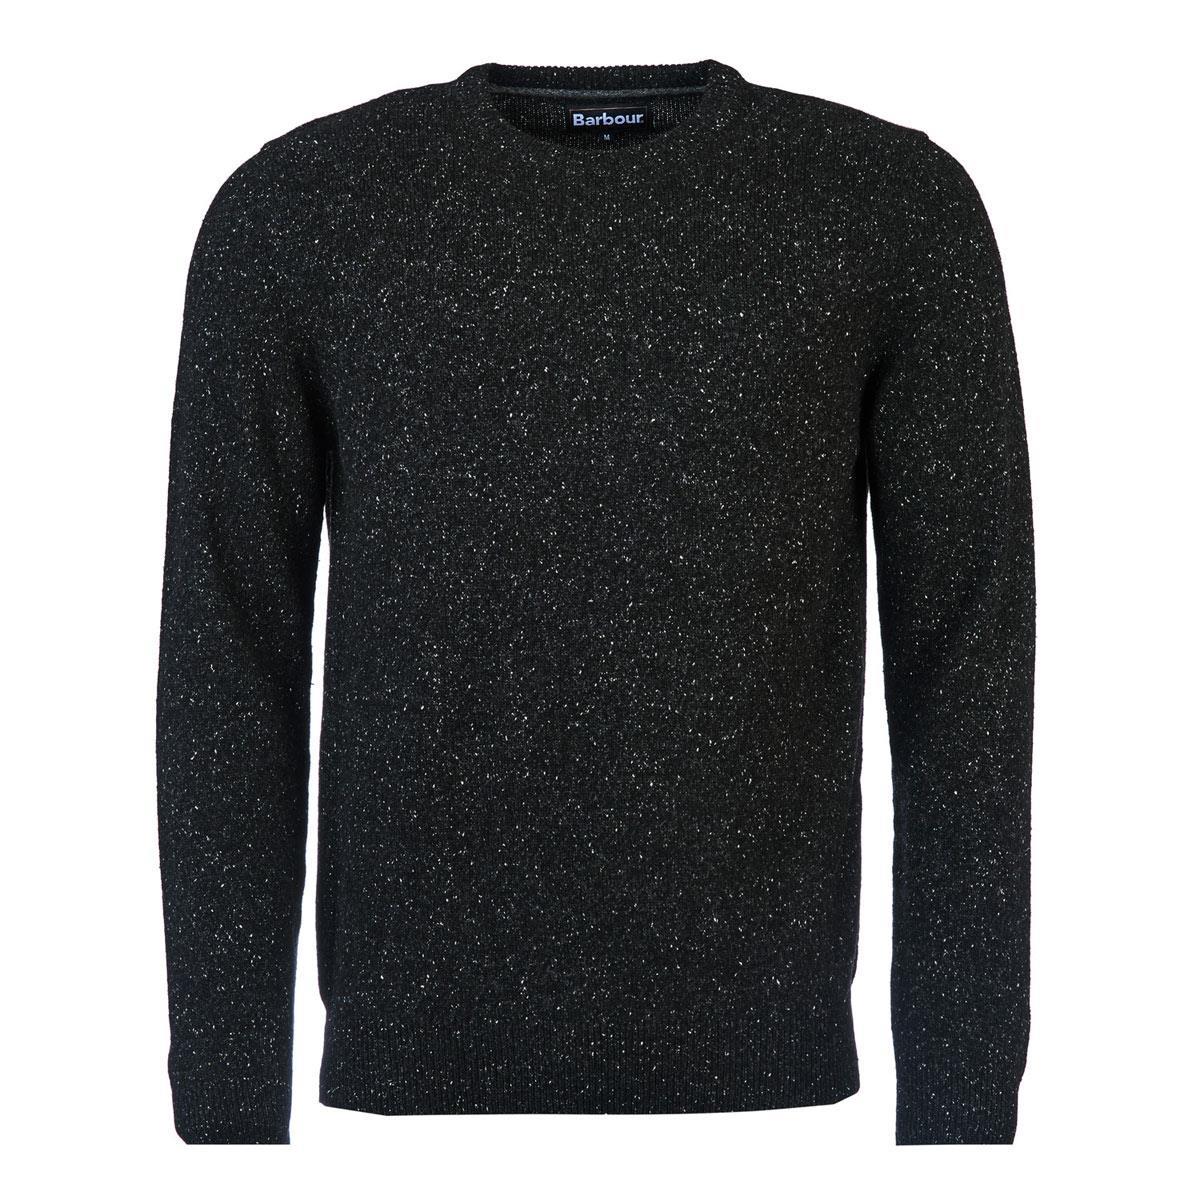 What is the fabric of the Barbour Tisbury Crew Neck Sweater?